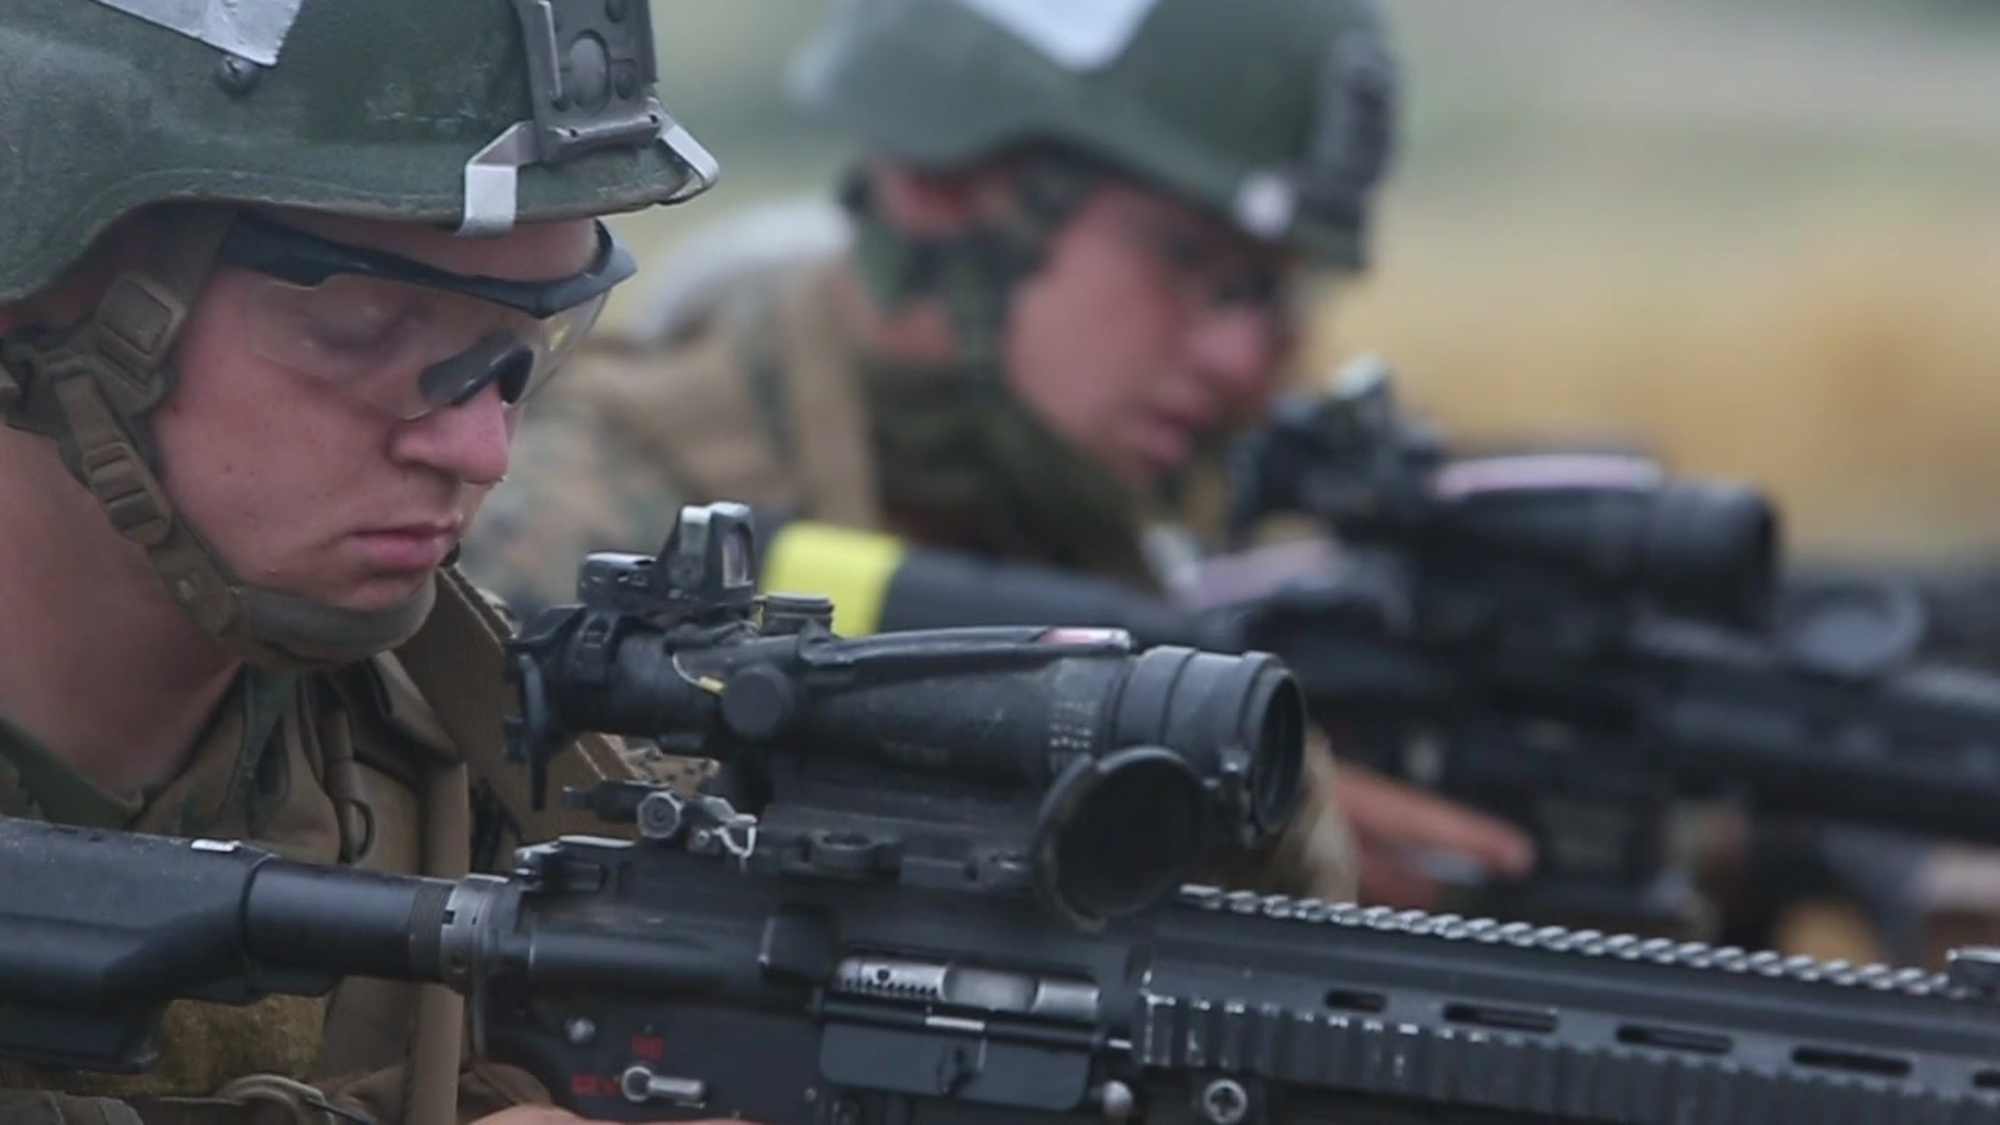 U.S. Marines with Alpha Company, Infantry Training Battalion, School of Infantry West, conduct an M27 Infantry Automatic Rifle familiarization range at Range 215A on Marine Corps Base Camp Pendleton, California, June 5, 2020. ITB trains, develops and certifies Marines as riflemen, as well as their primary military occupational specialty within the infantry field, before sending them to join the Fleet Marine Force. (U.S. Marine Corps video by Cpl. Dylan Chagnon)